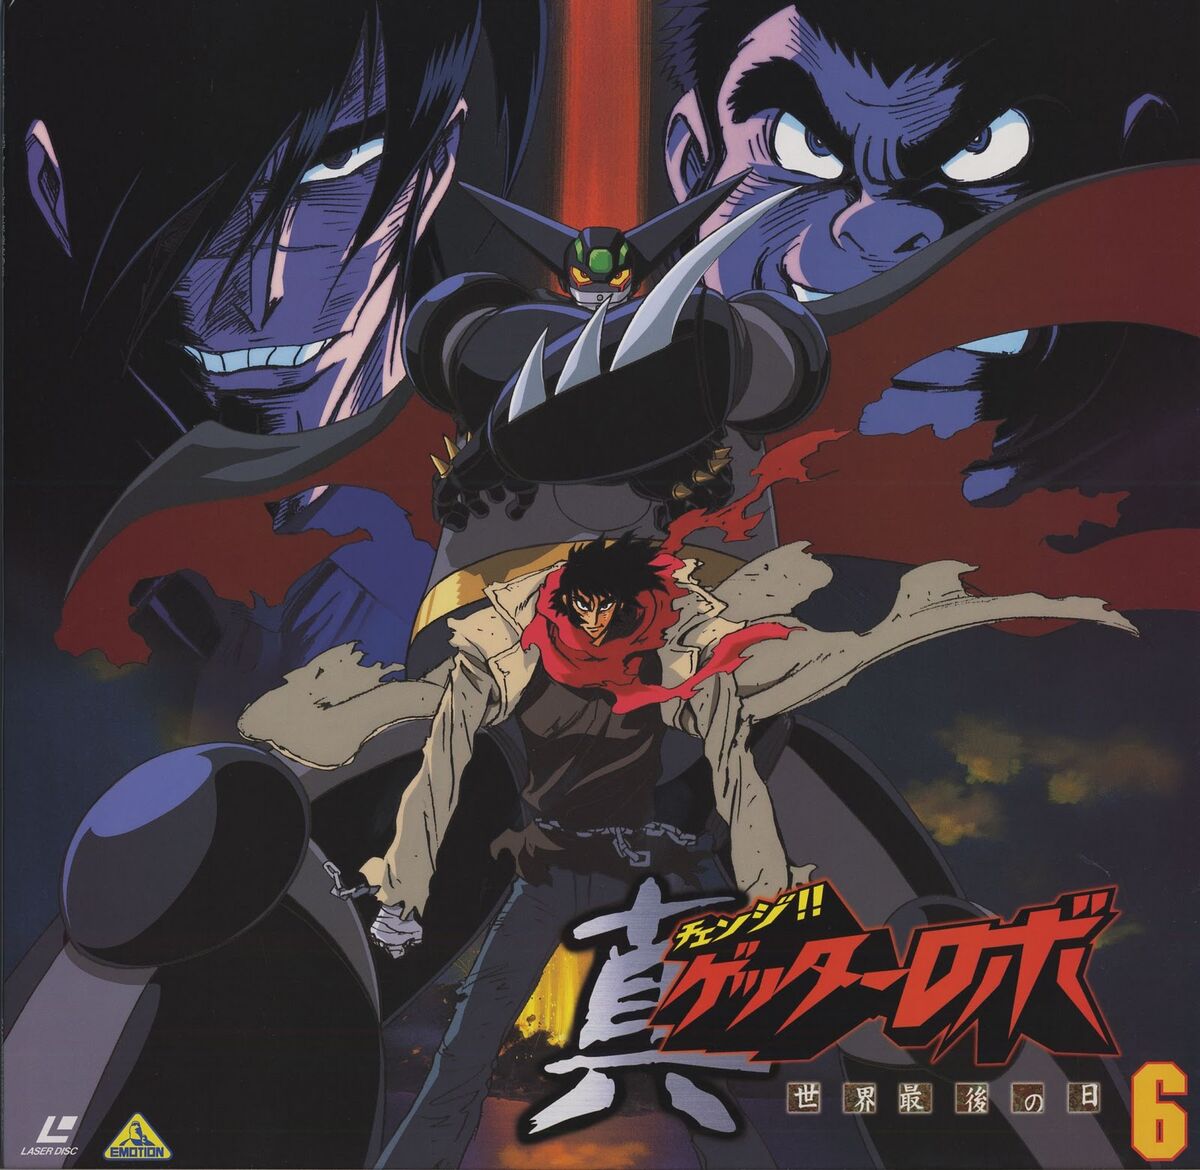 There really is nothing like 90s animation. Getter Robo has become